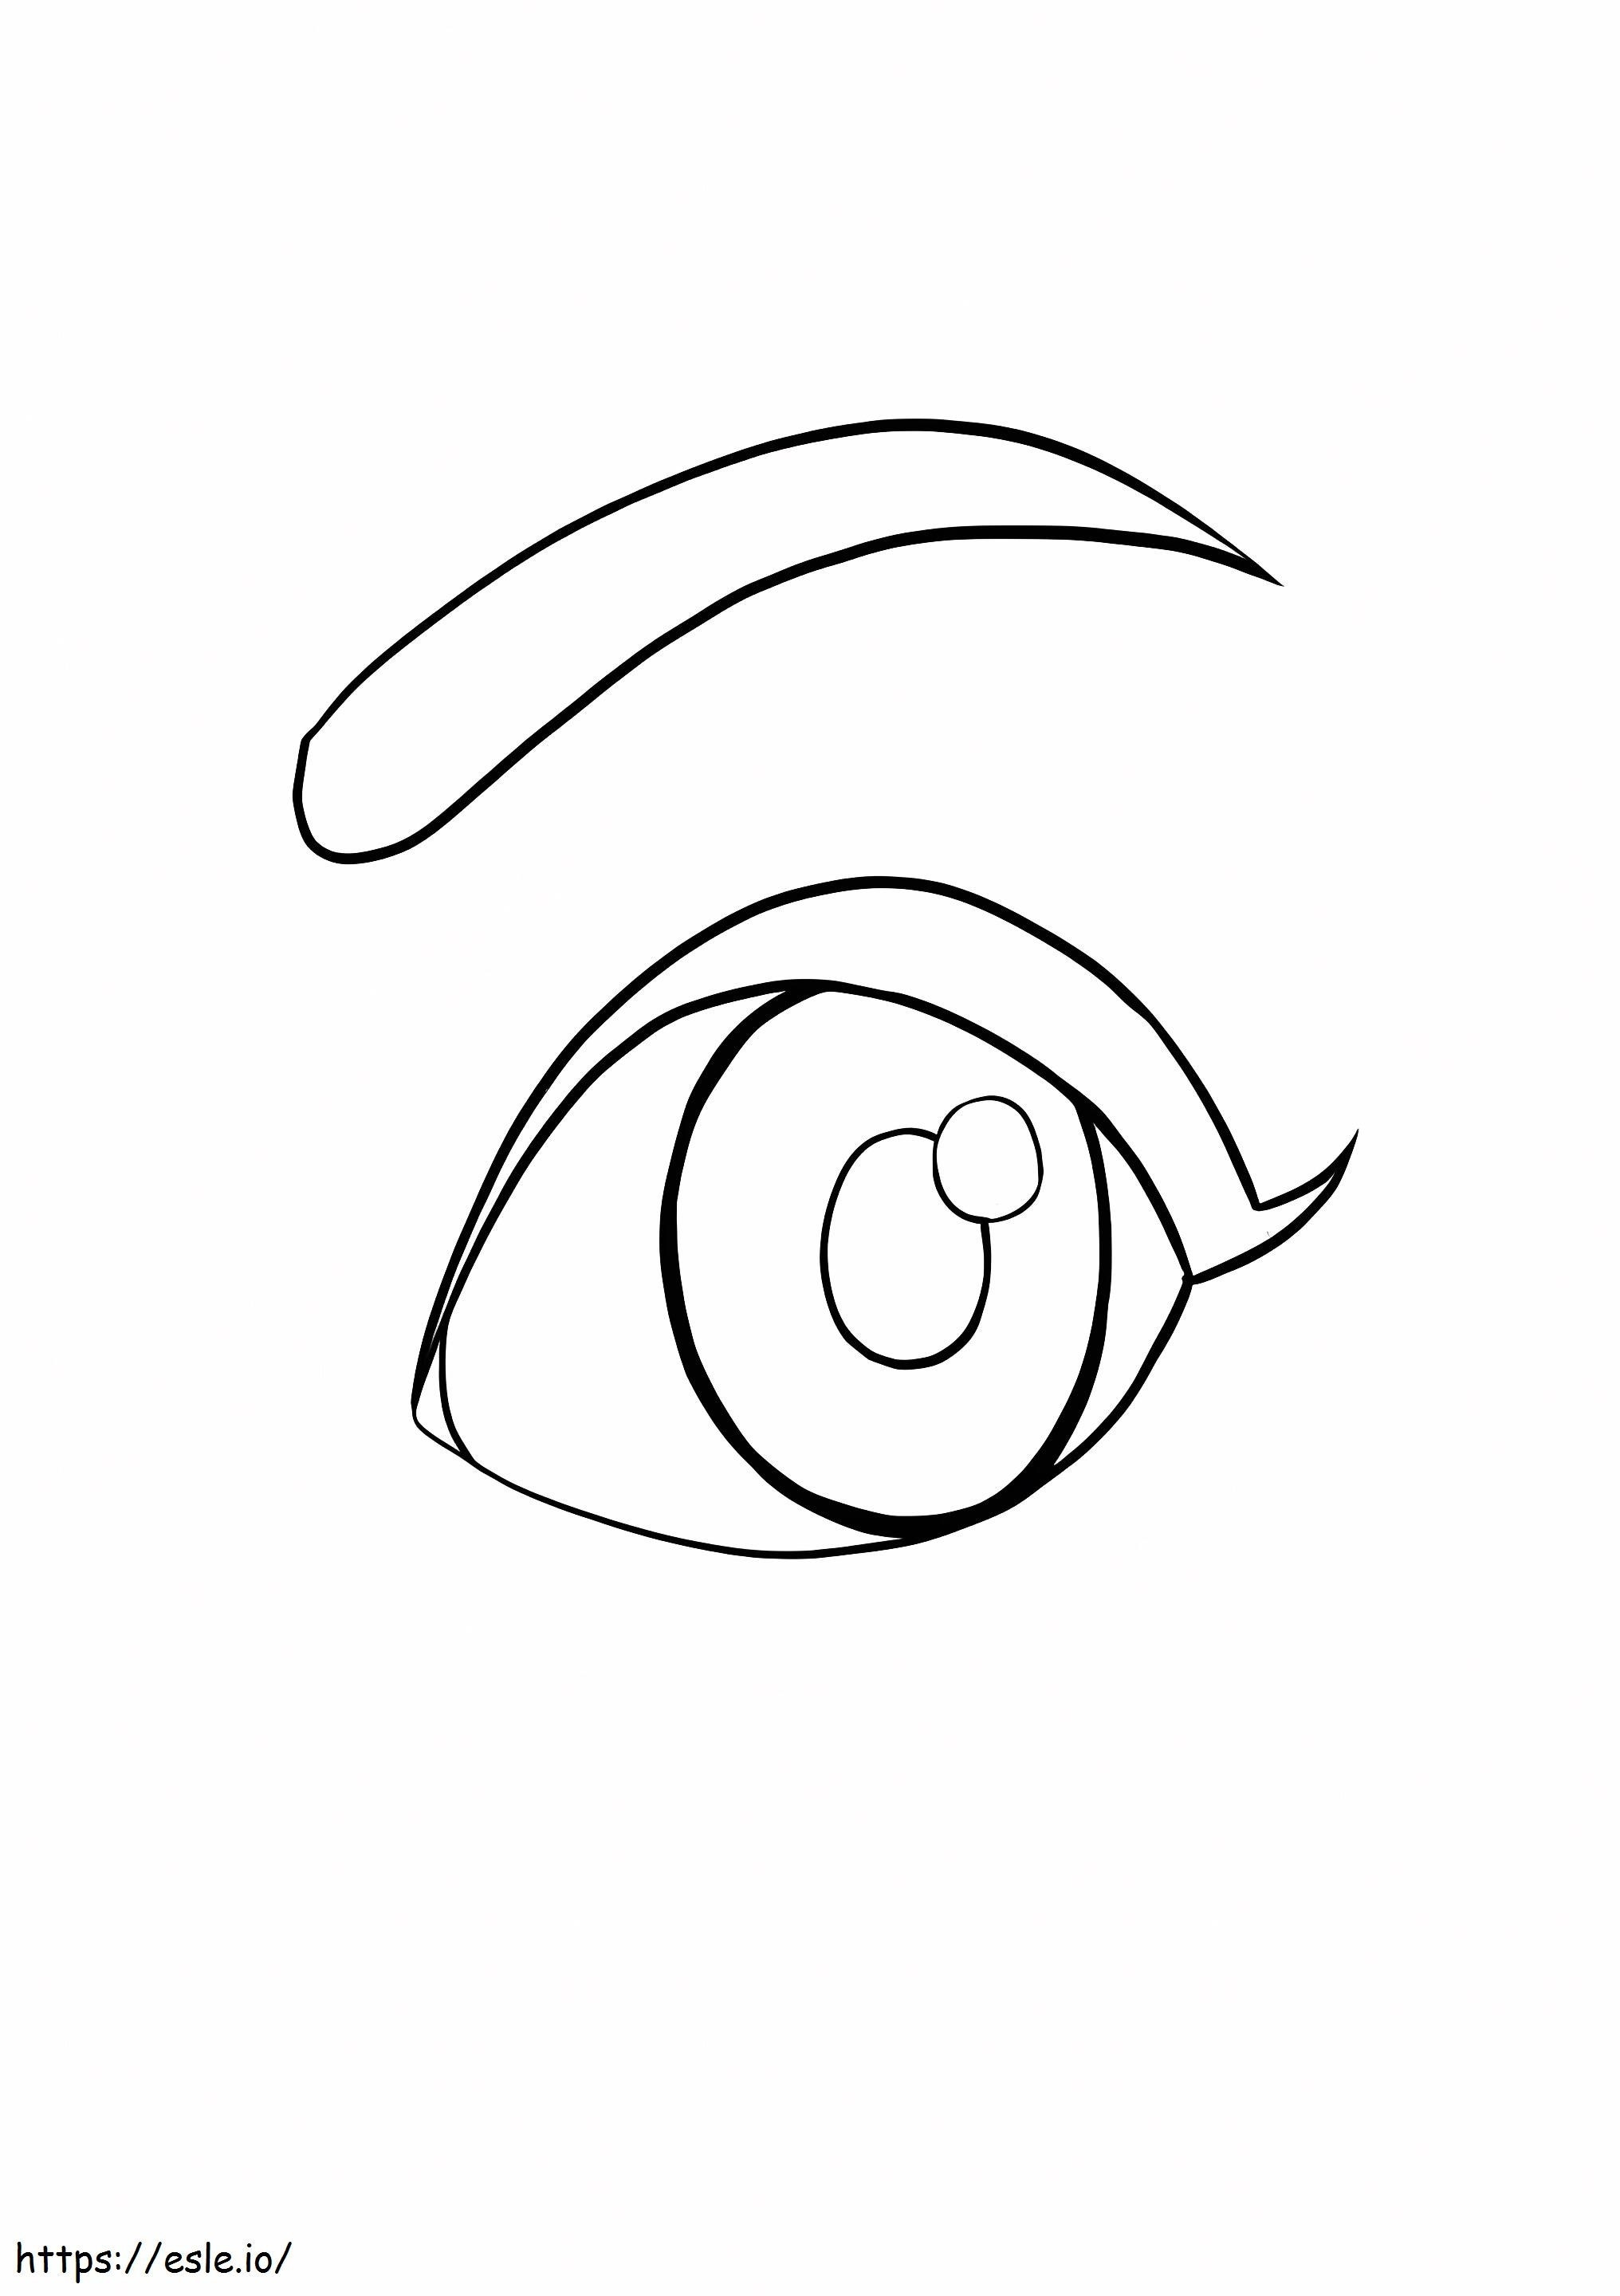 Angry Eye coloring page